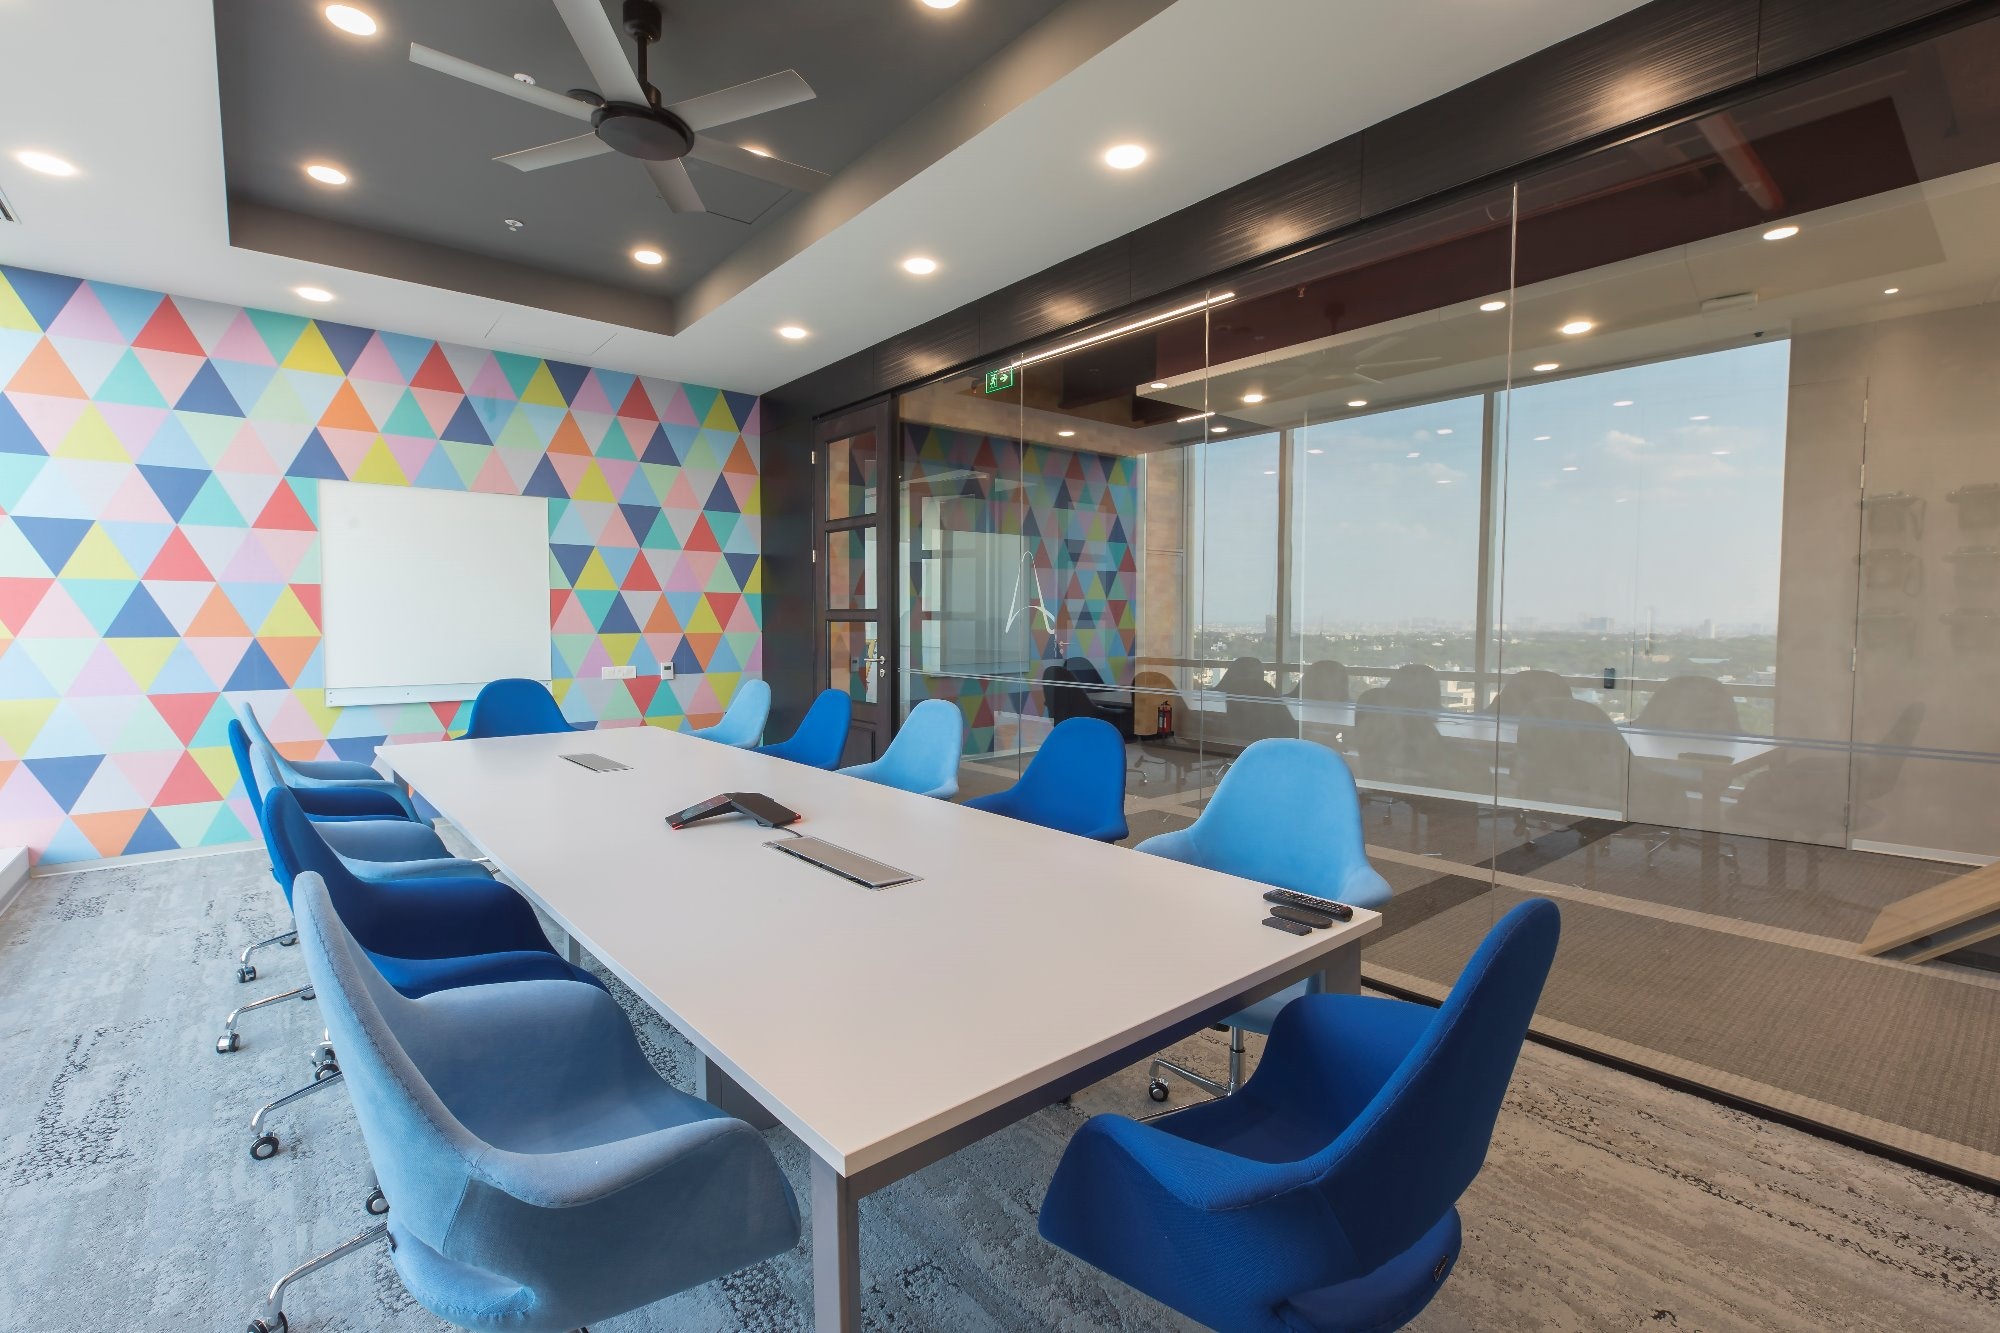 A meeting room with colorful elements and a glass partition